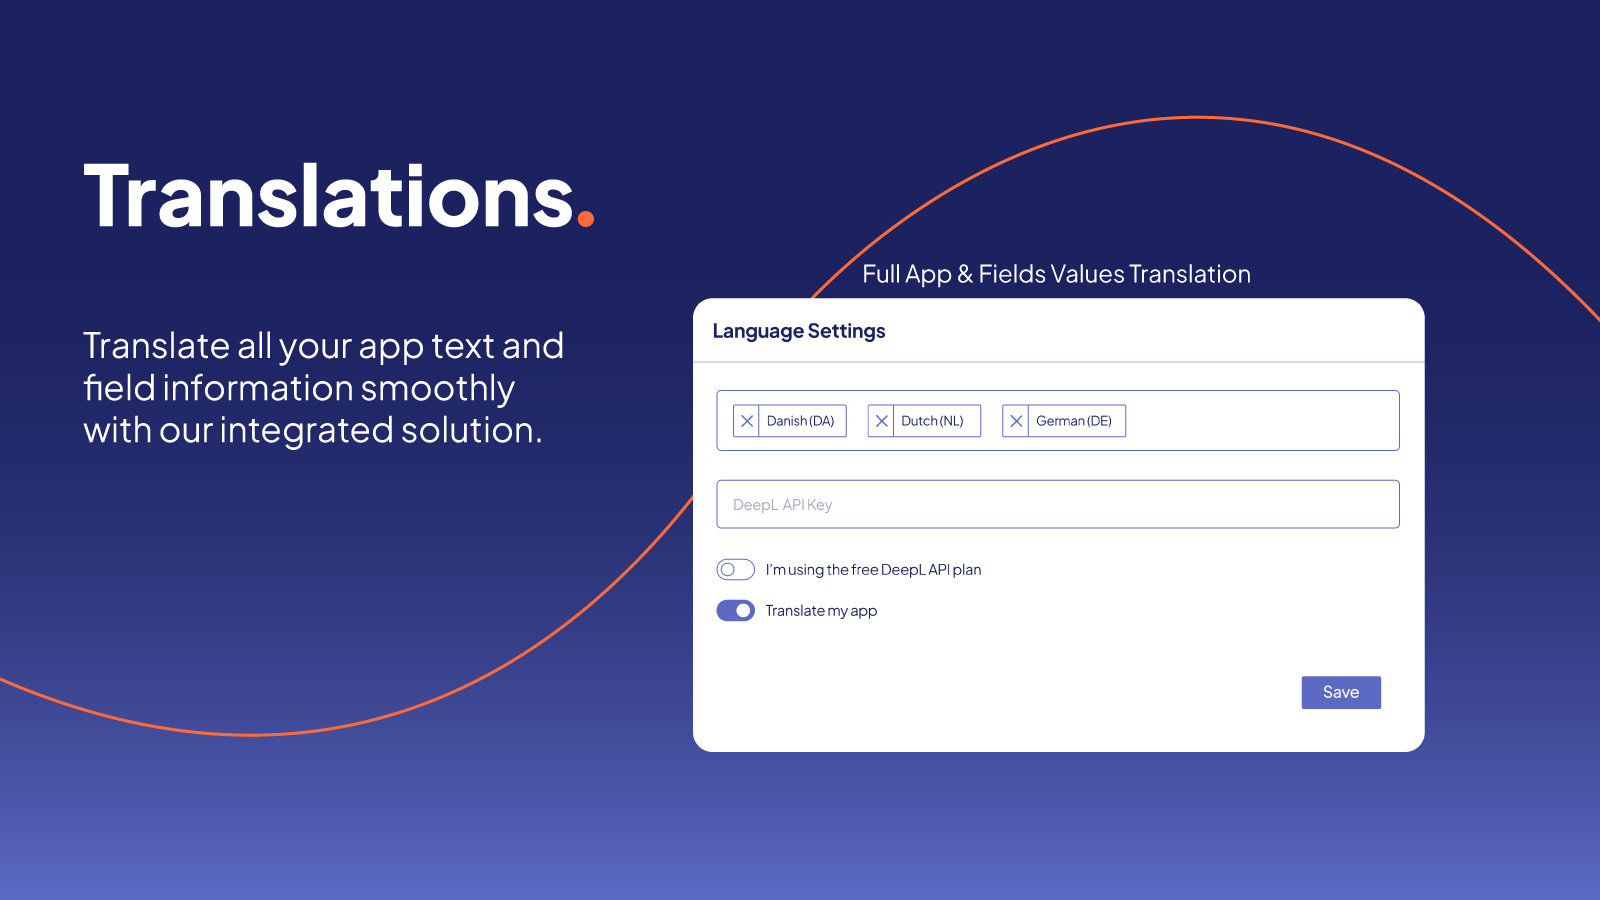 Smooth app text and field translation with our solution.